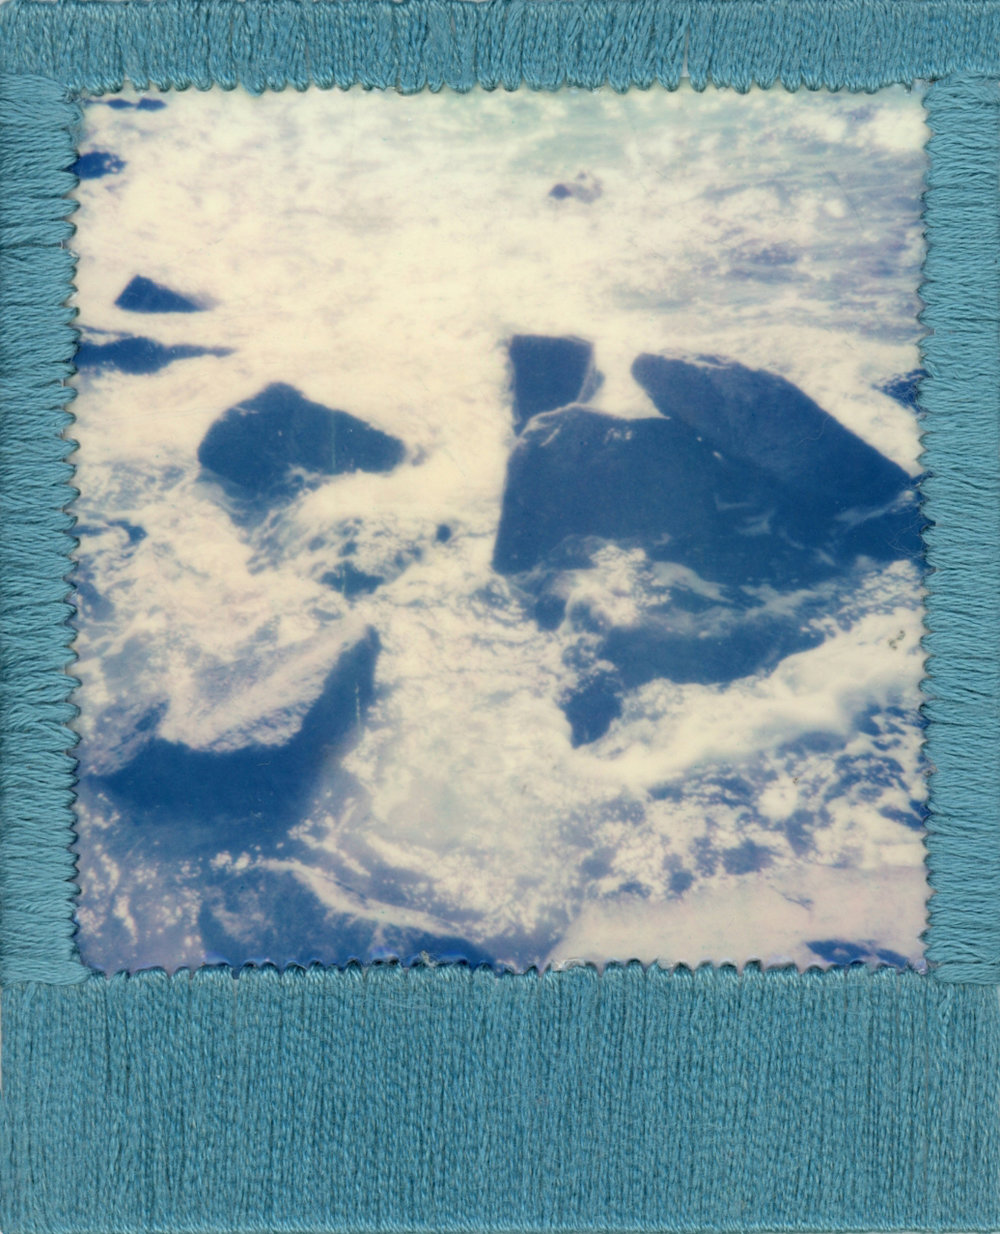 emma j starr embroidered polaroid 'the distance from here' TSKW key west artist.jpg